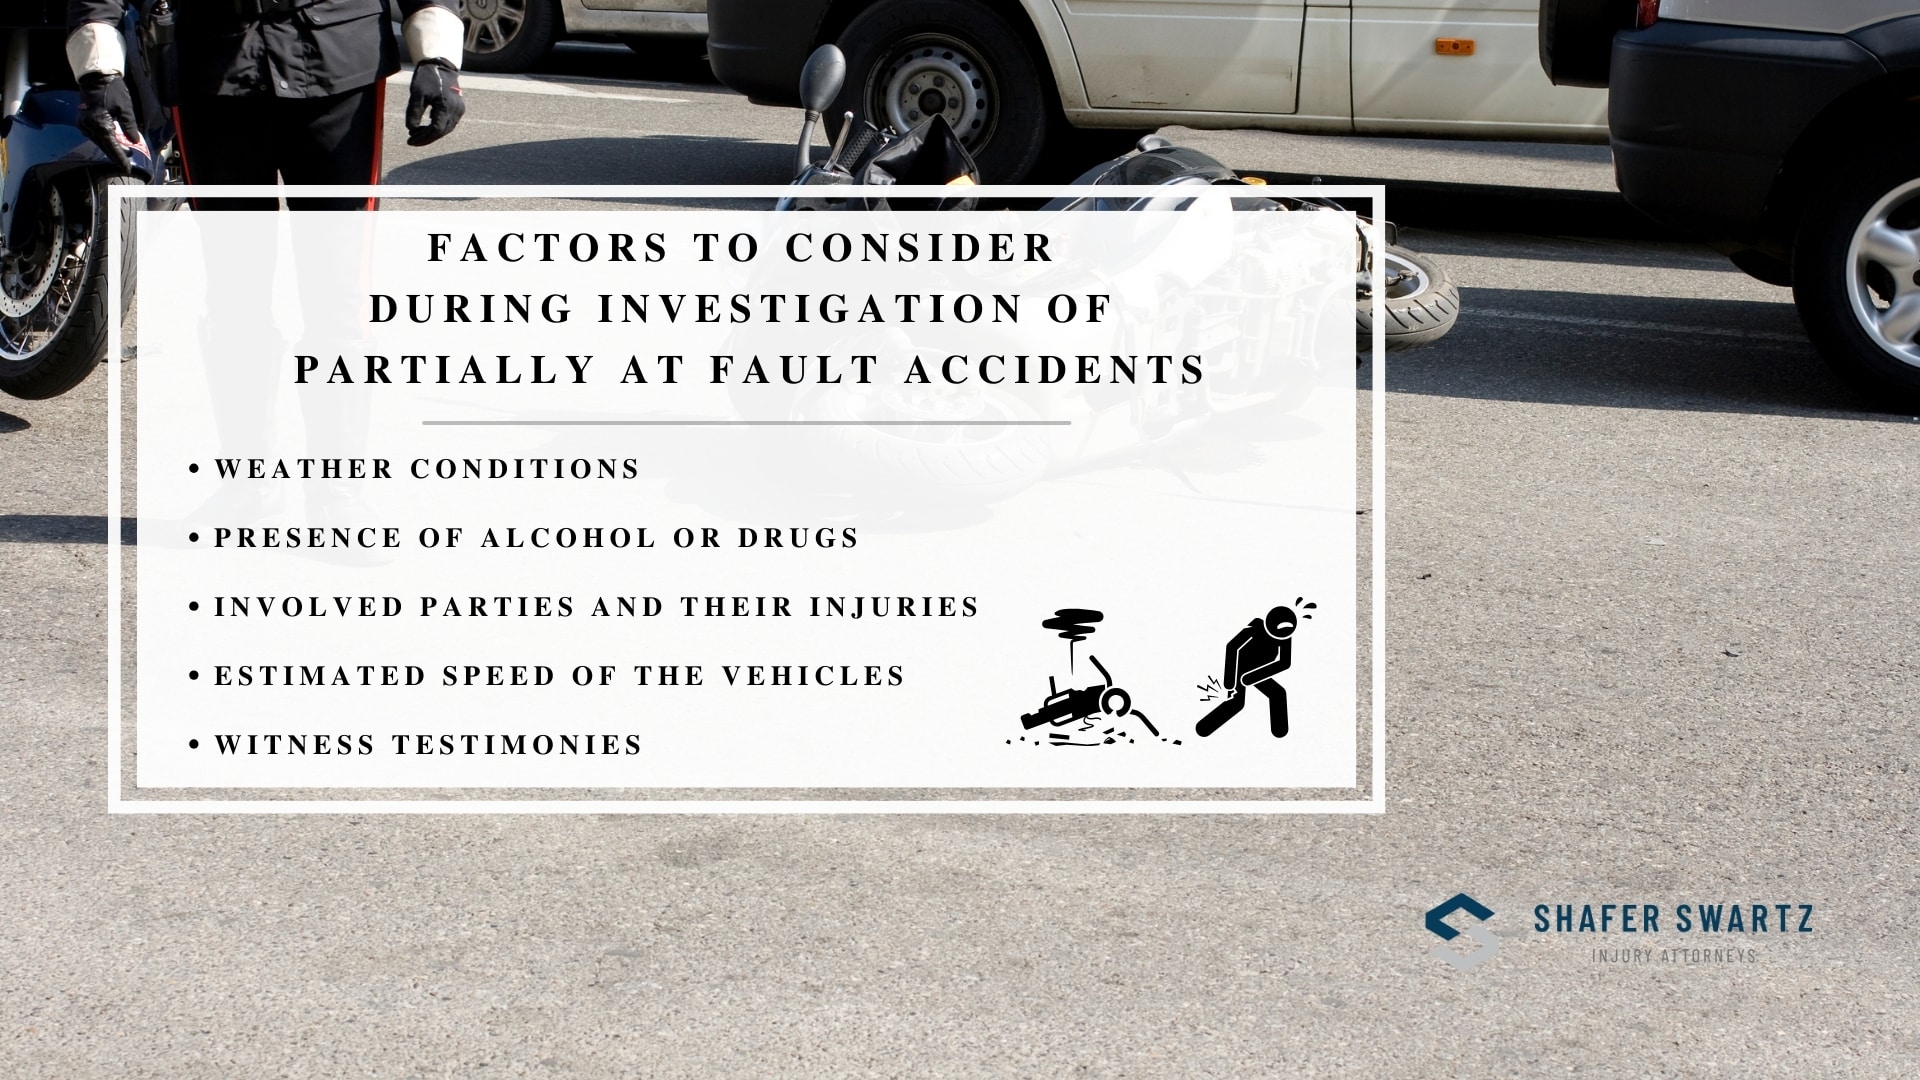 Infographic image of factors to consider during investigation of partially at fault accidents